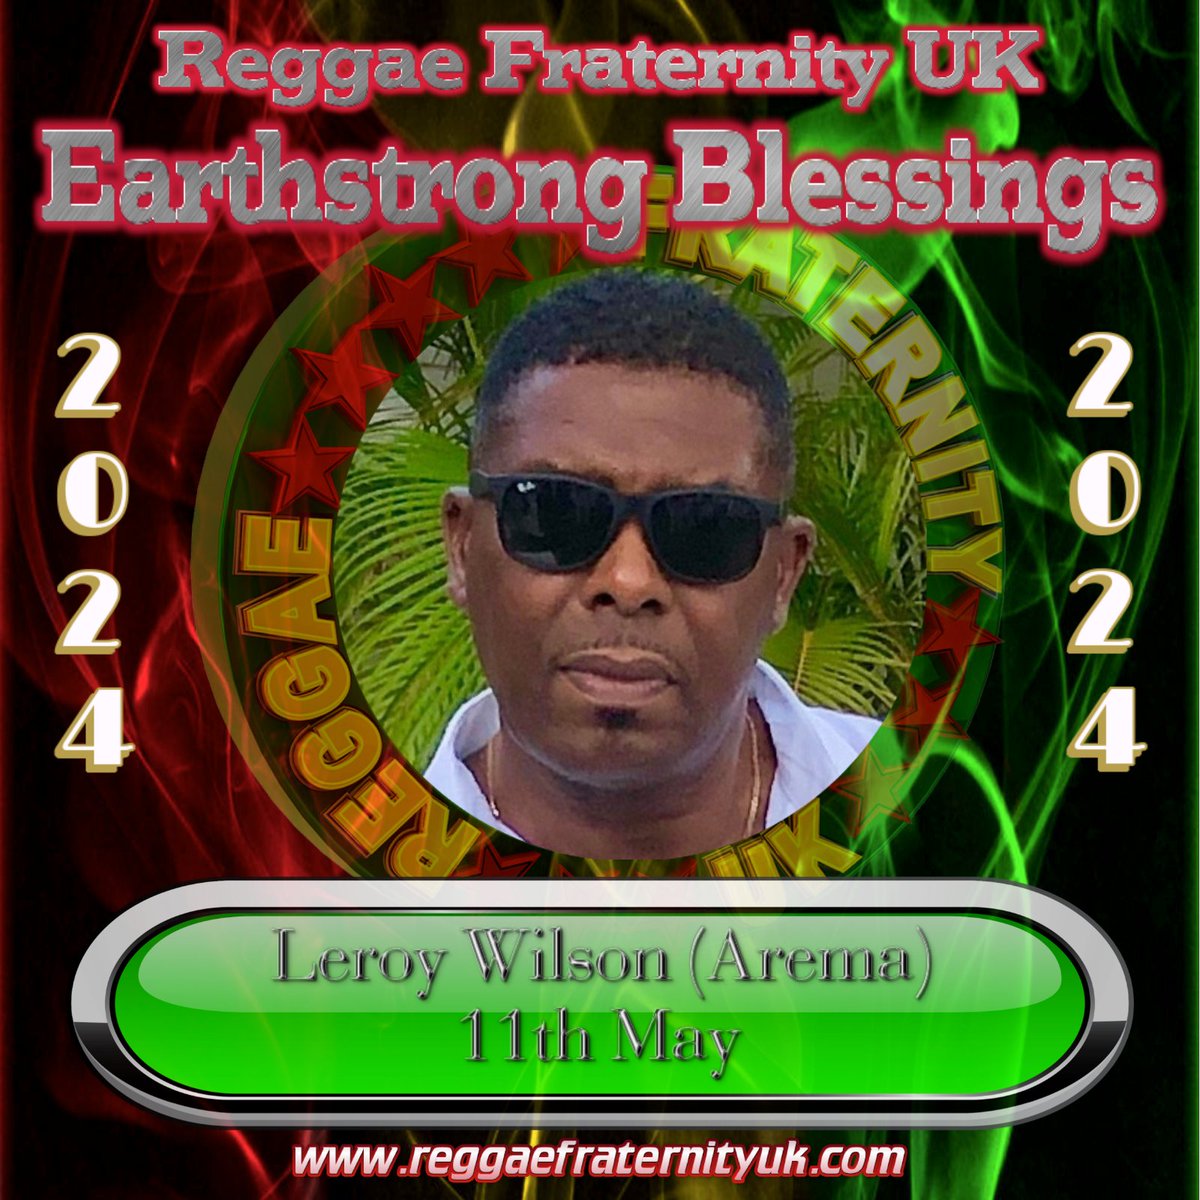 A Special Earthday greeting goes out to our very own Leroy Wilson of Arema Lovers Rock Group fame & RFUK Treasurer 🥂🍾🎉🎈🎂@leroywilson8 have a blessed day 🥂#rfuk #reggaemusic #loversrock #reggae #singer #earthstrong #blessings #Arema #LeroyWilson